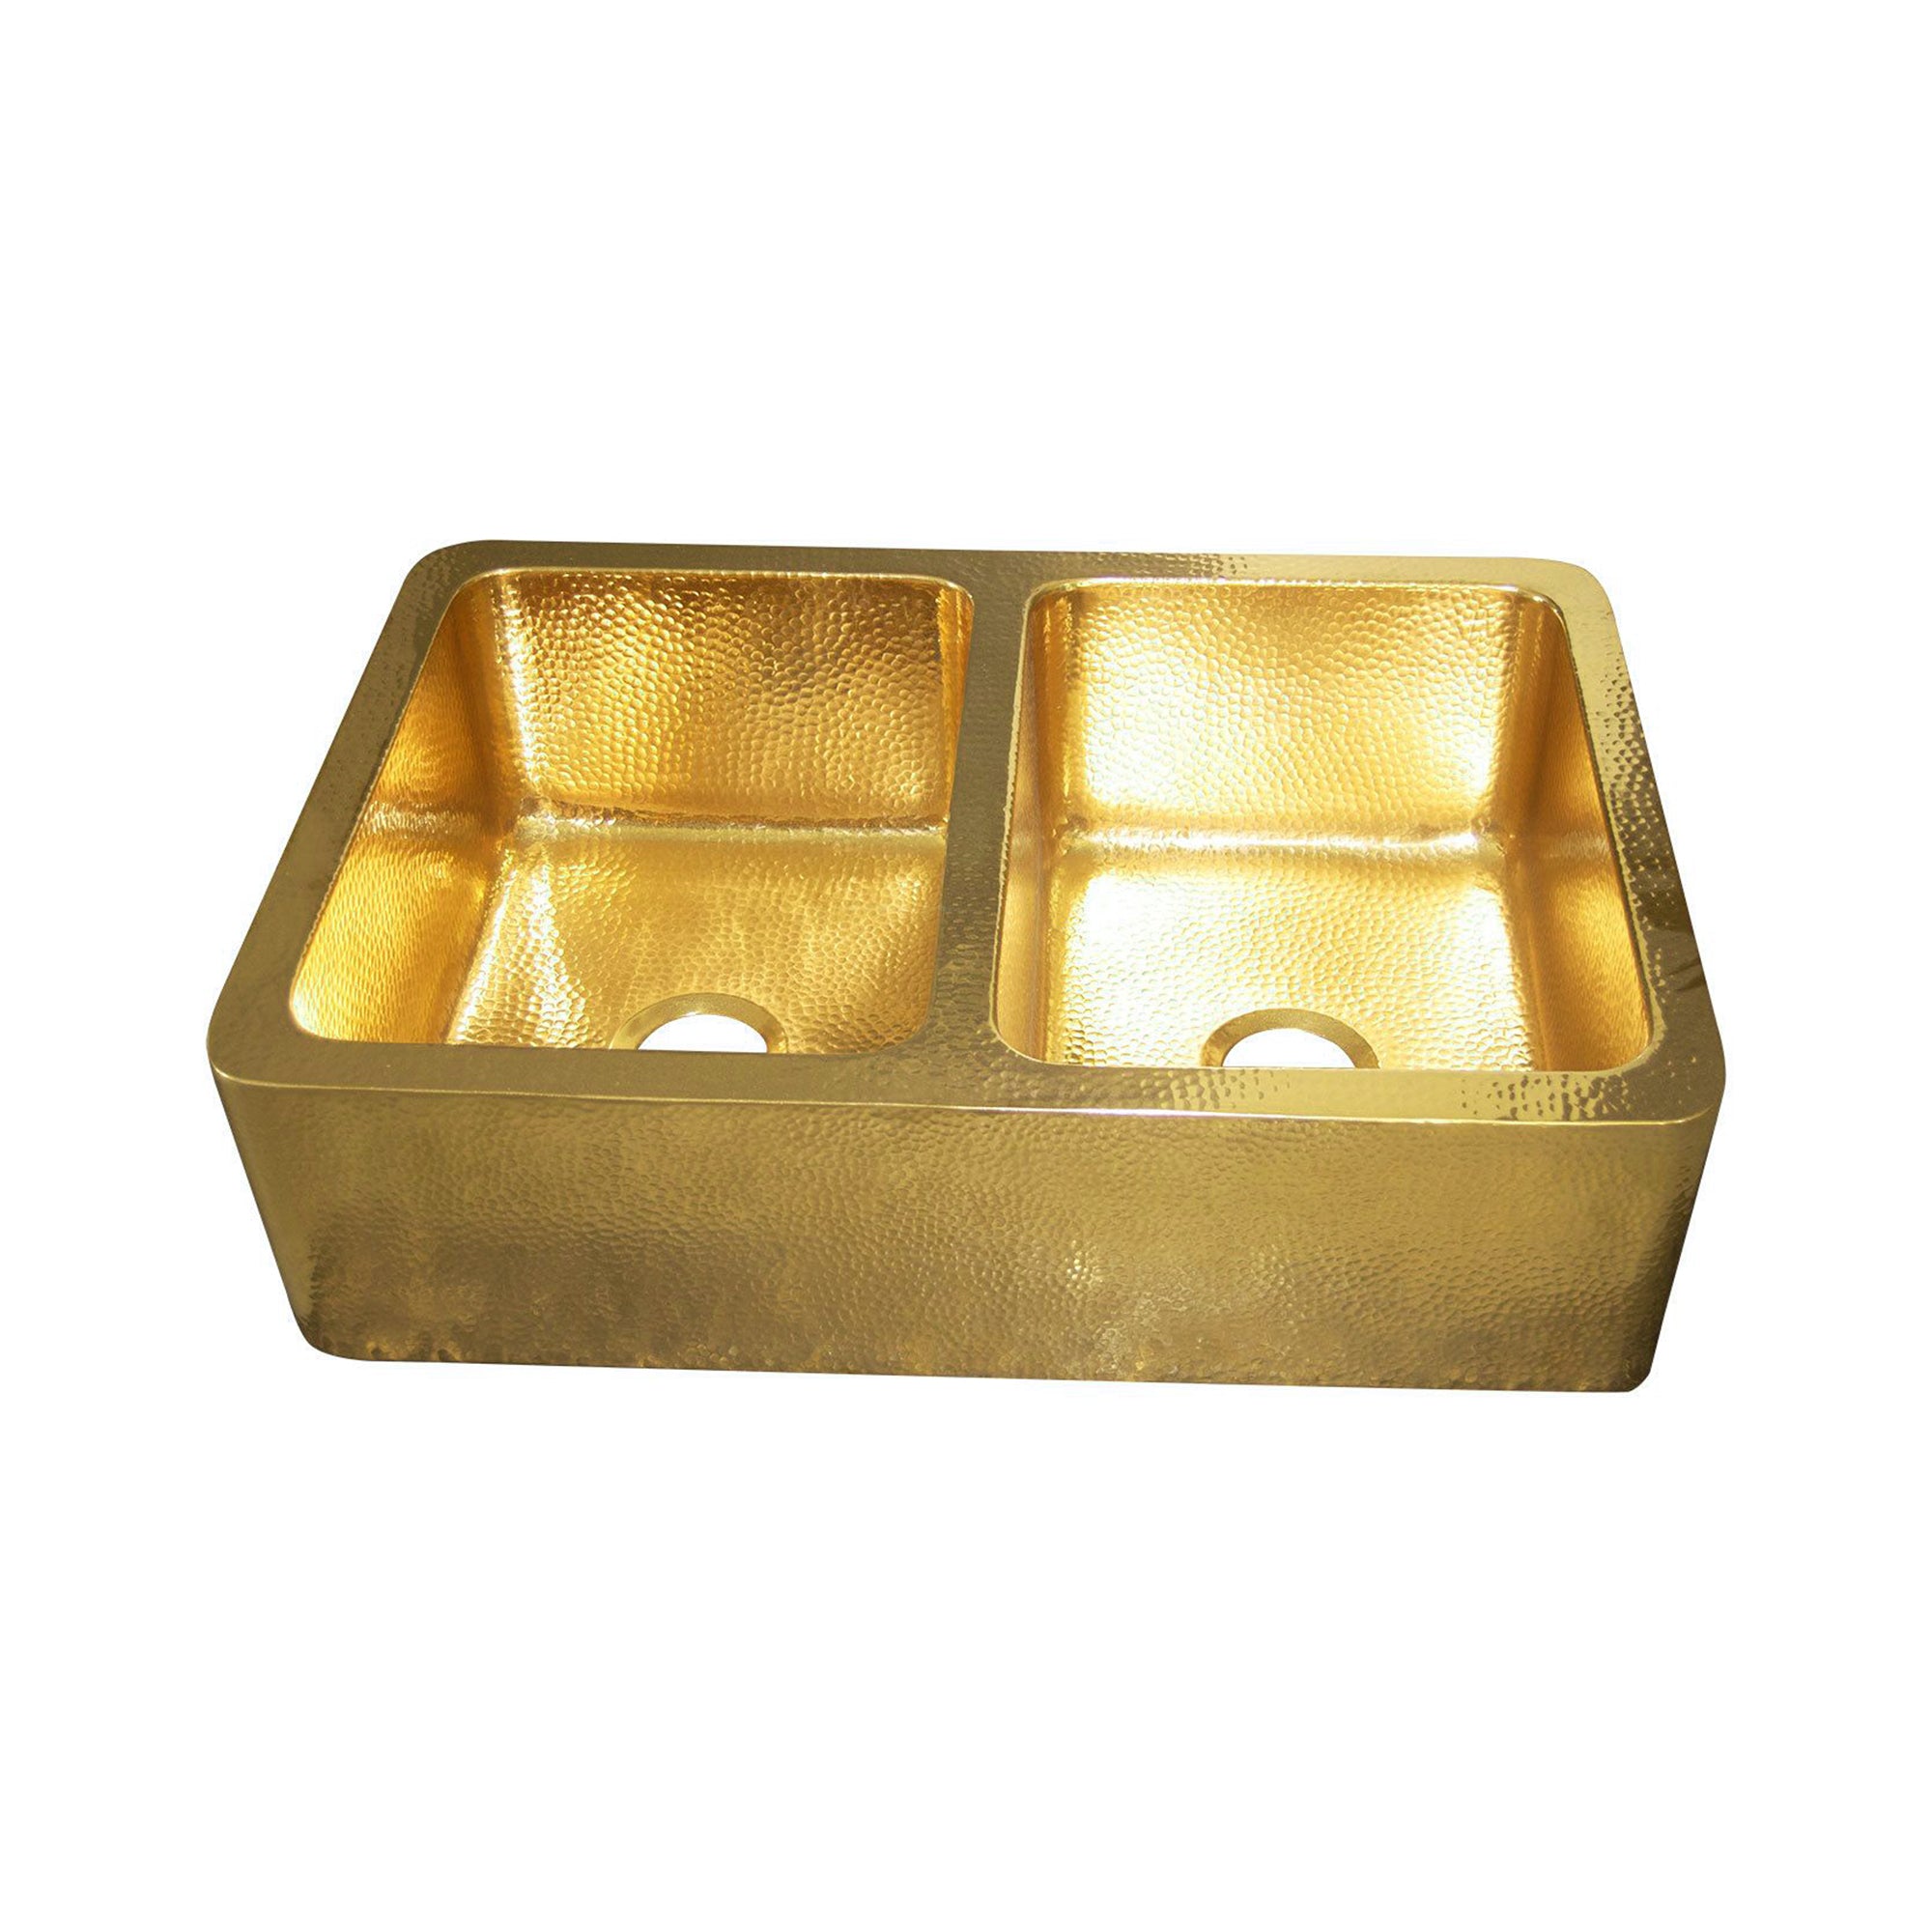 Hammered Patina Brass Wall Mount Sink With Solid Brass Faucet